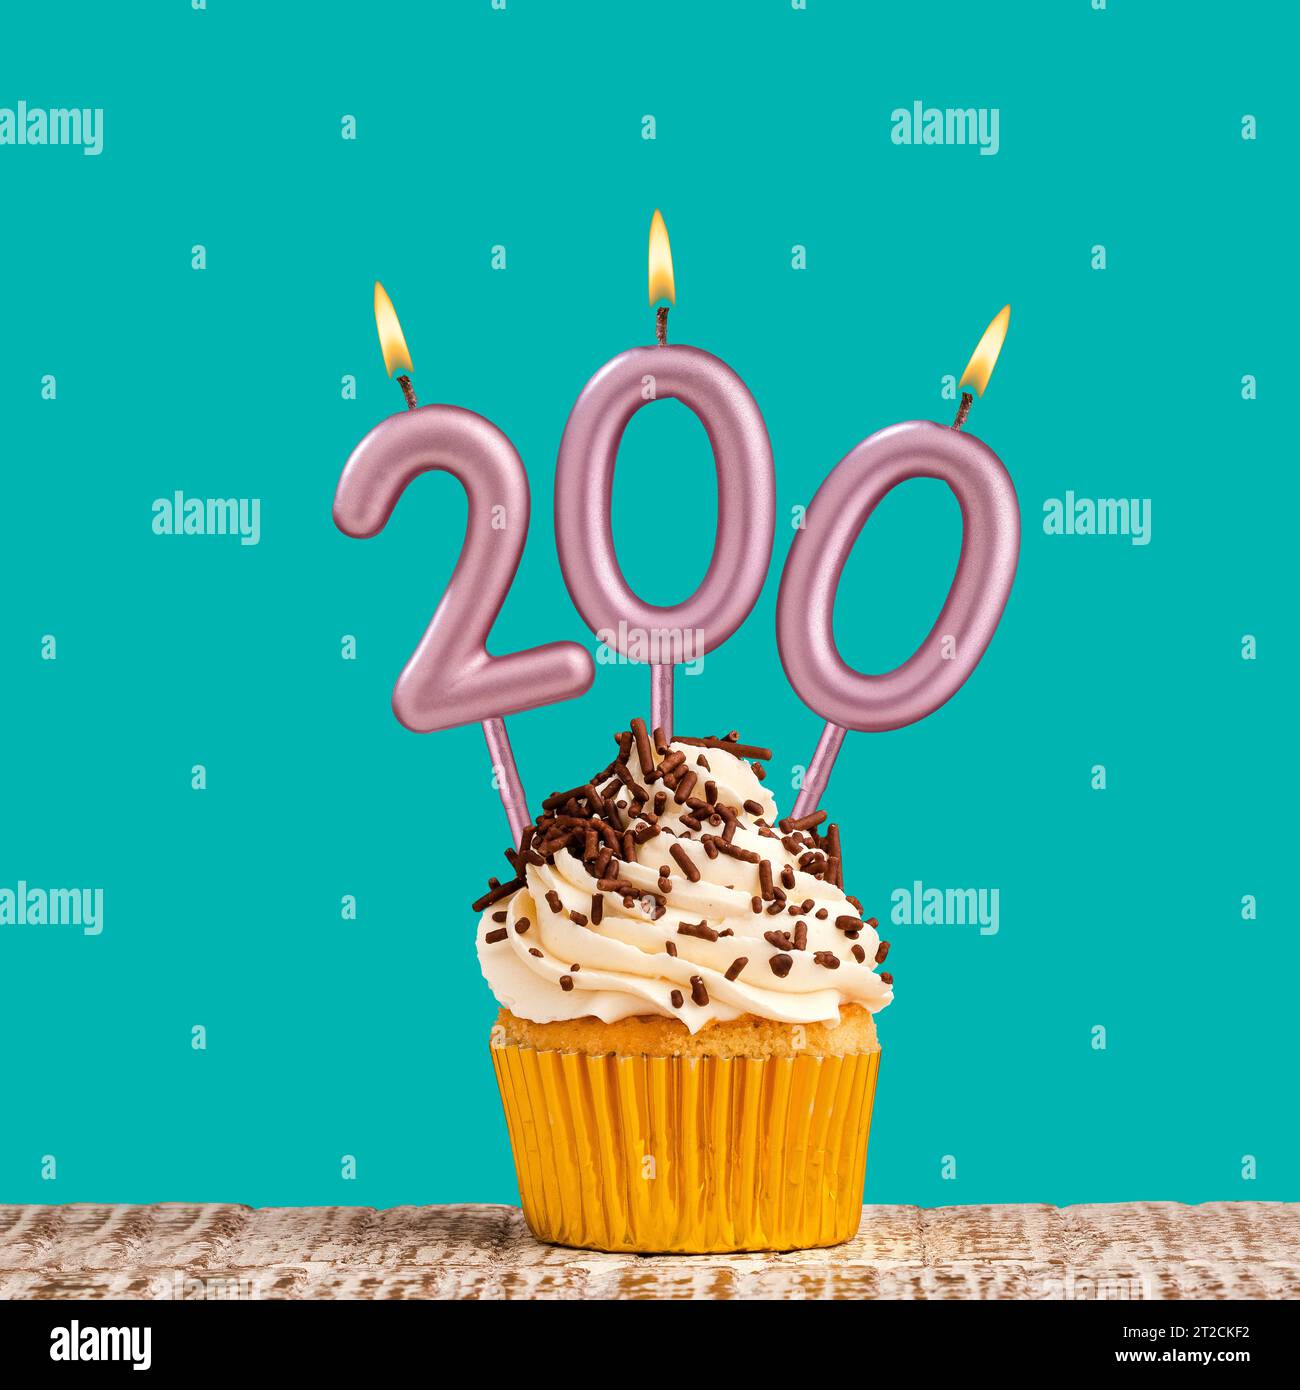 Number of followers or likes - Candle number 200 Stock Photo